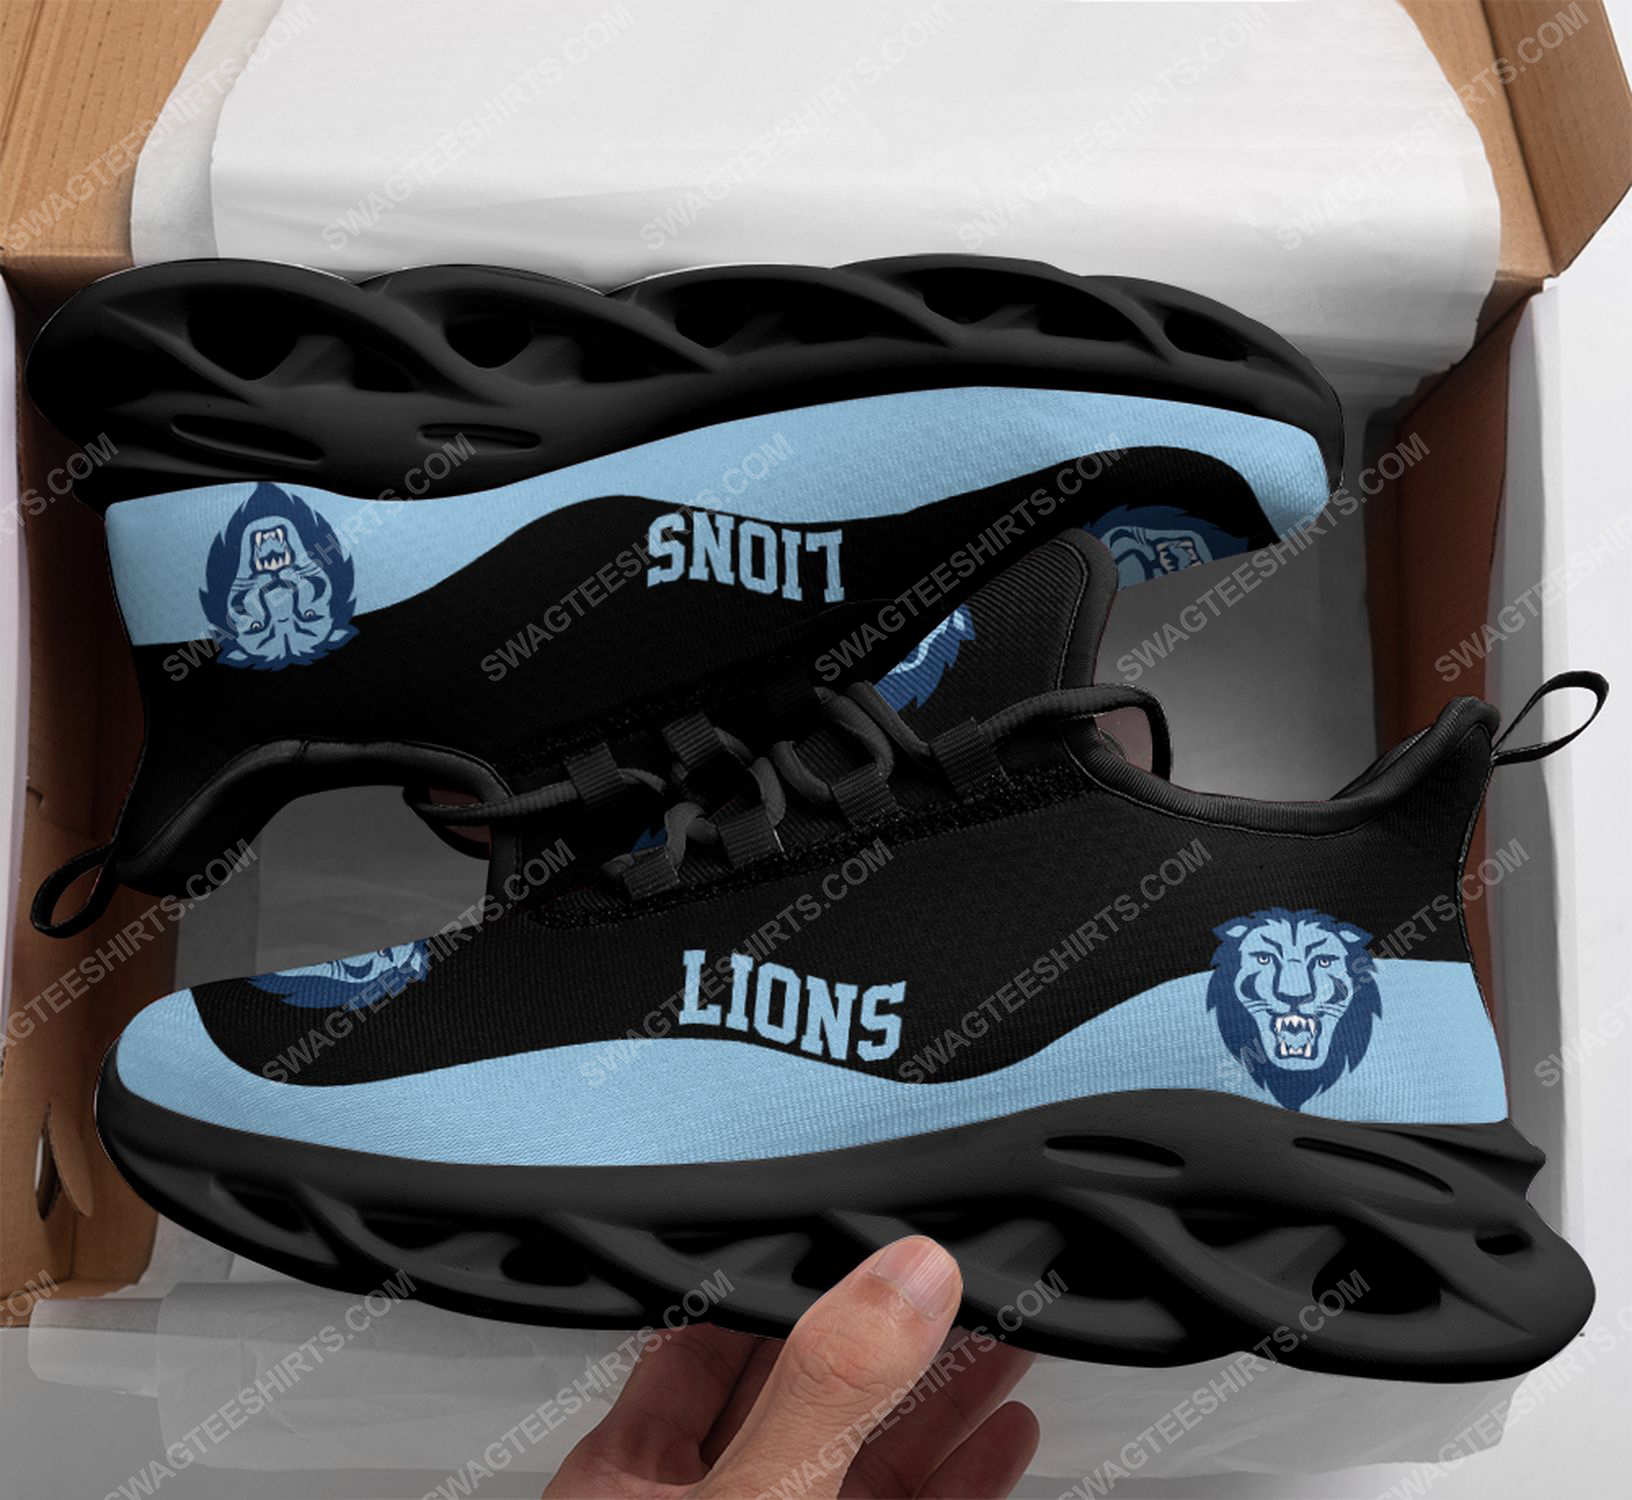 The columbia lions football team max soul shoes 3